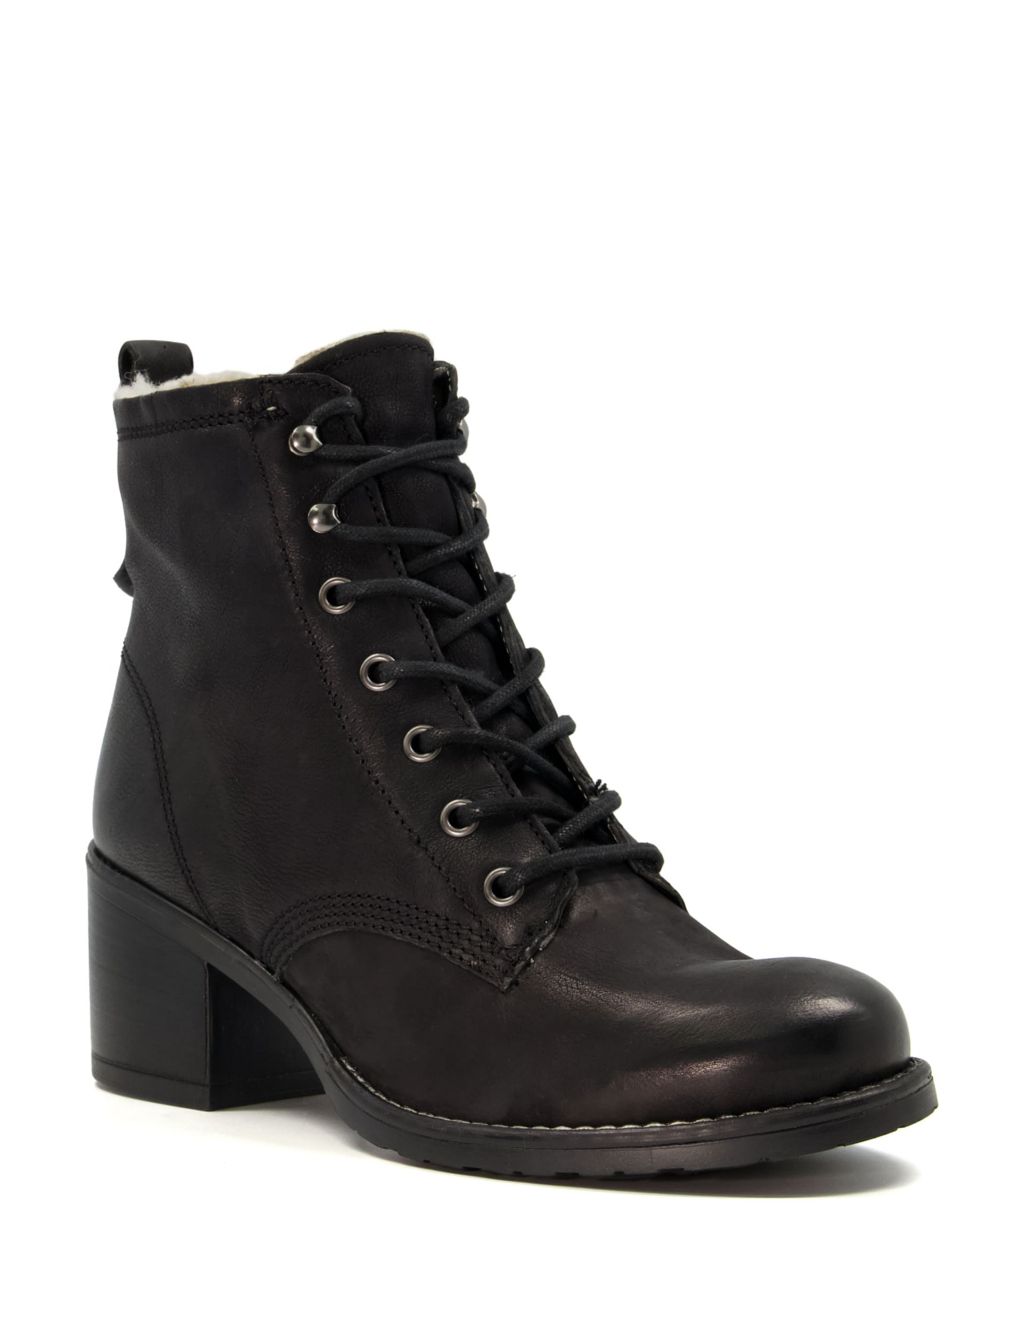 Leather Lace Up Block Heel Ankle Boots image 2